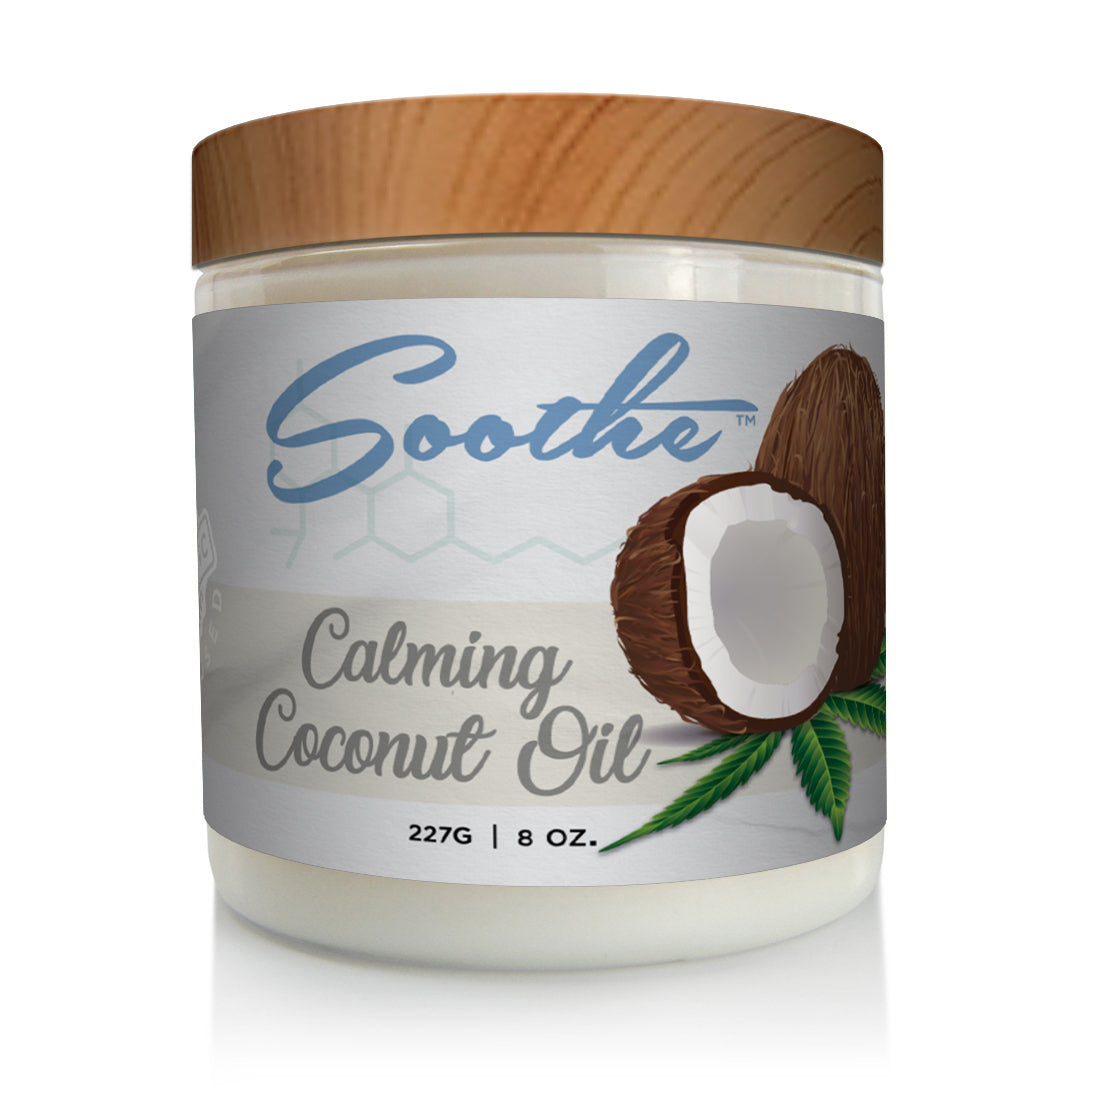 Sample Soothe Hemp Infused Calming Coconut Oil with Collagen